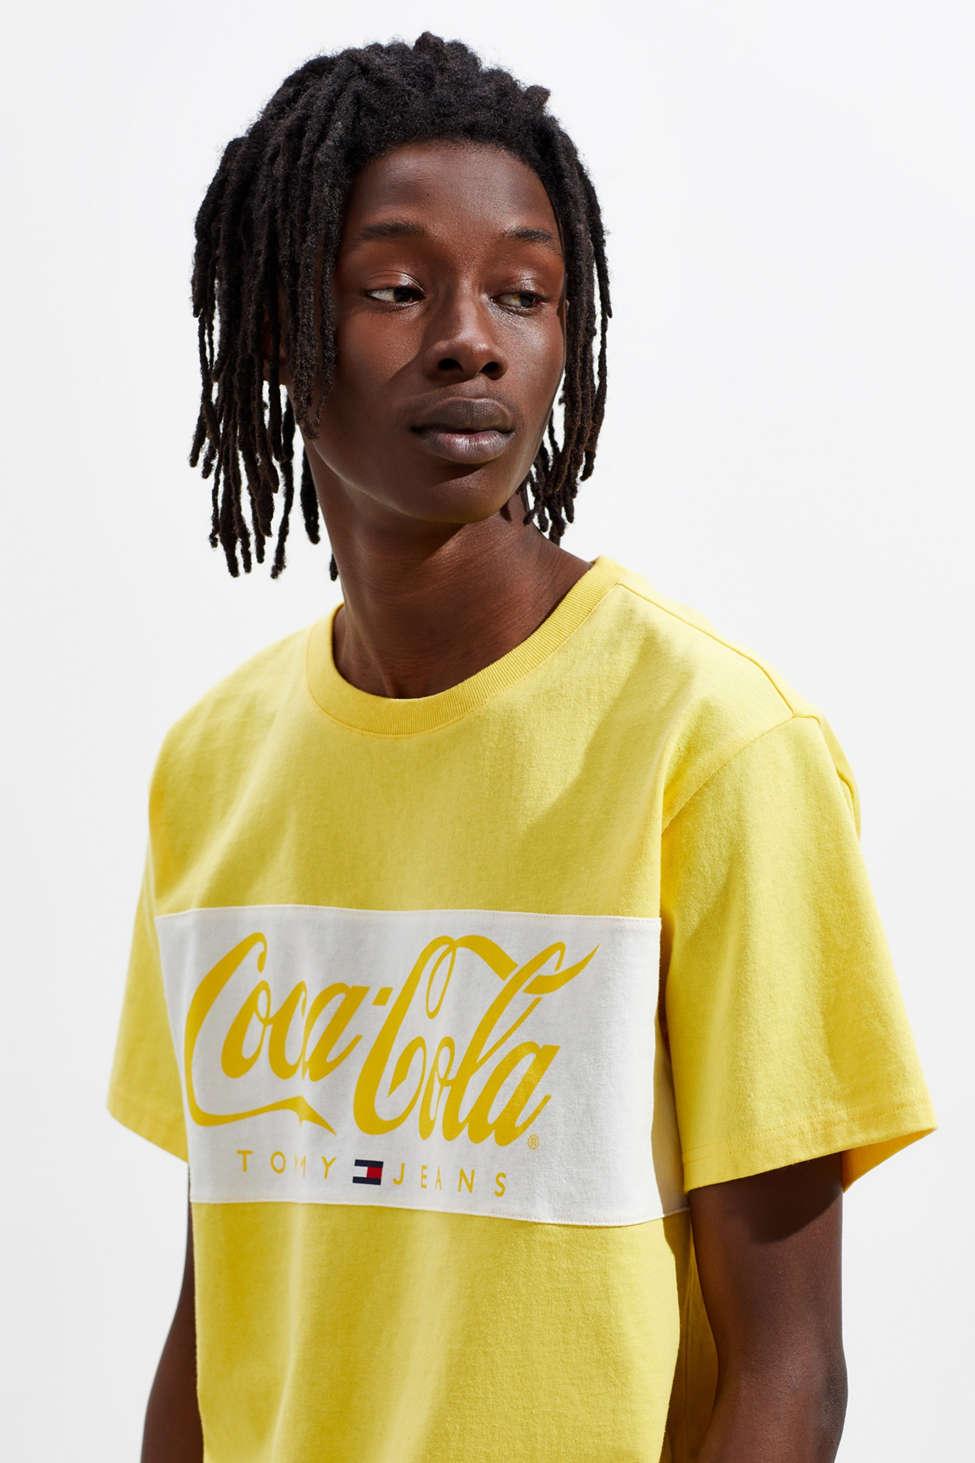 Tommy Hilfiger Denim X Coca-cola Tee in Yellow for Men - Lyst